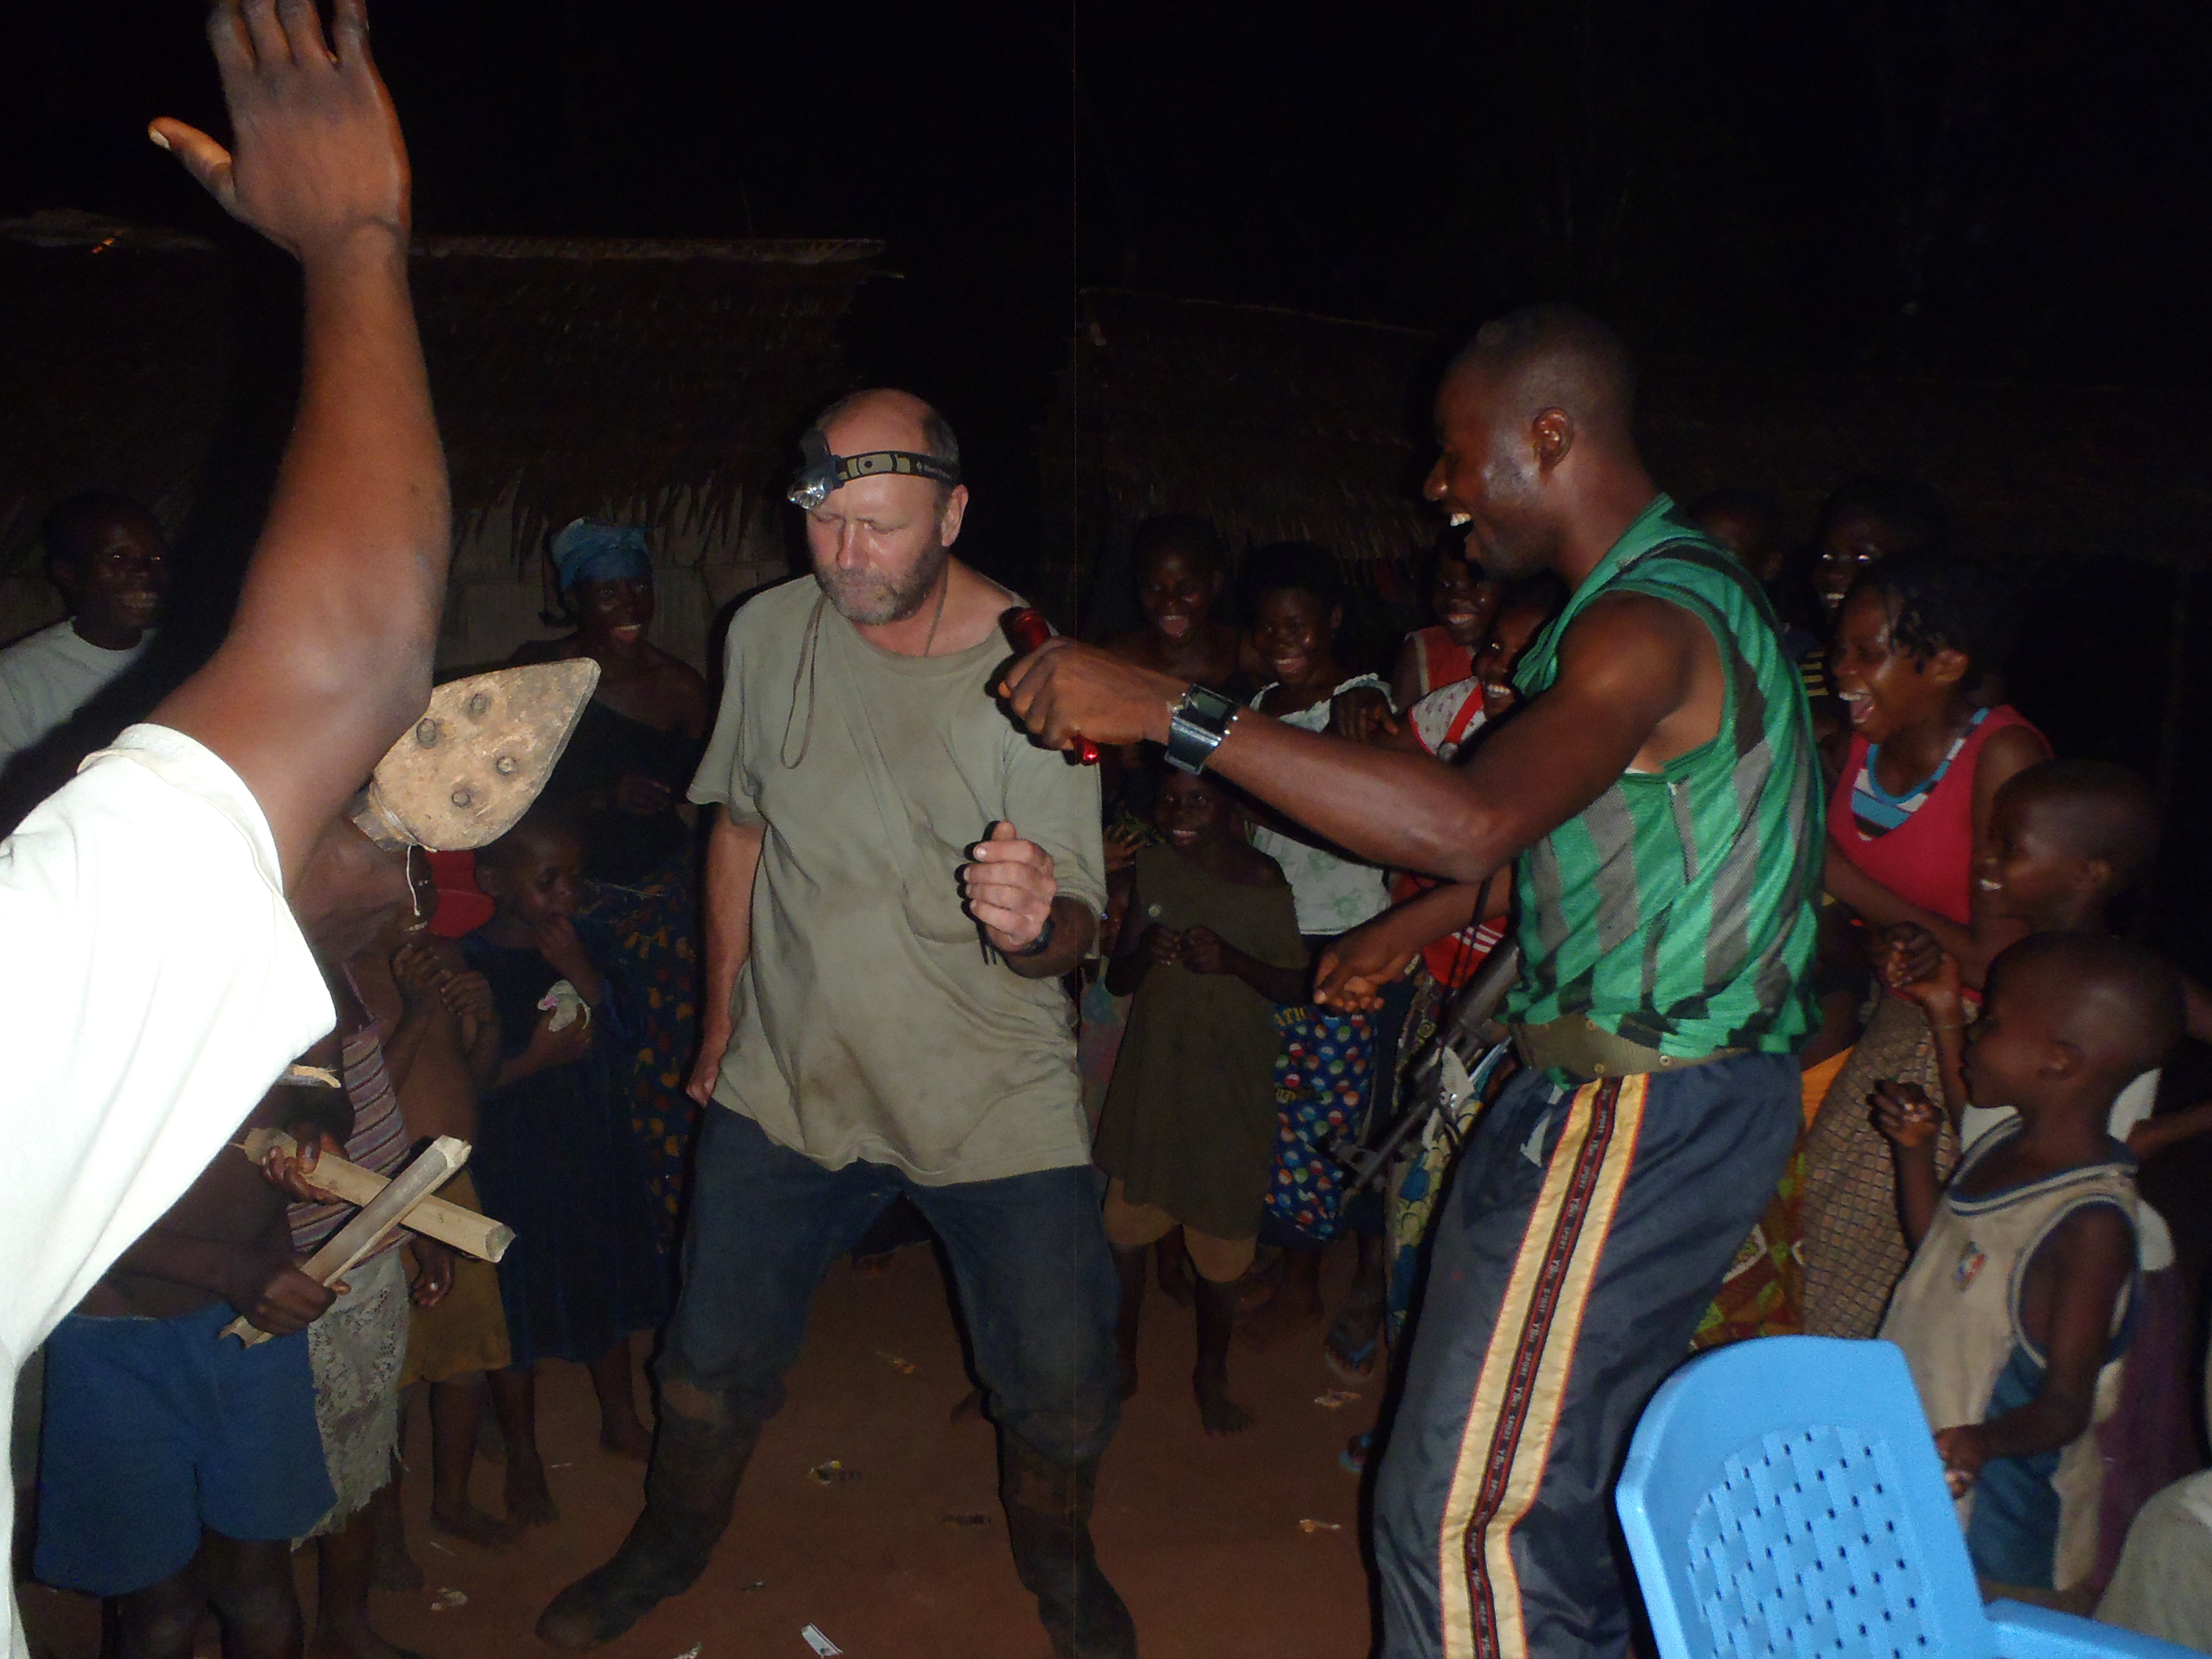 Party in the Congo (after a hard day of fieldwork), 2012. Courtesy of Lem’s Kalemba.